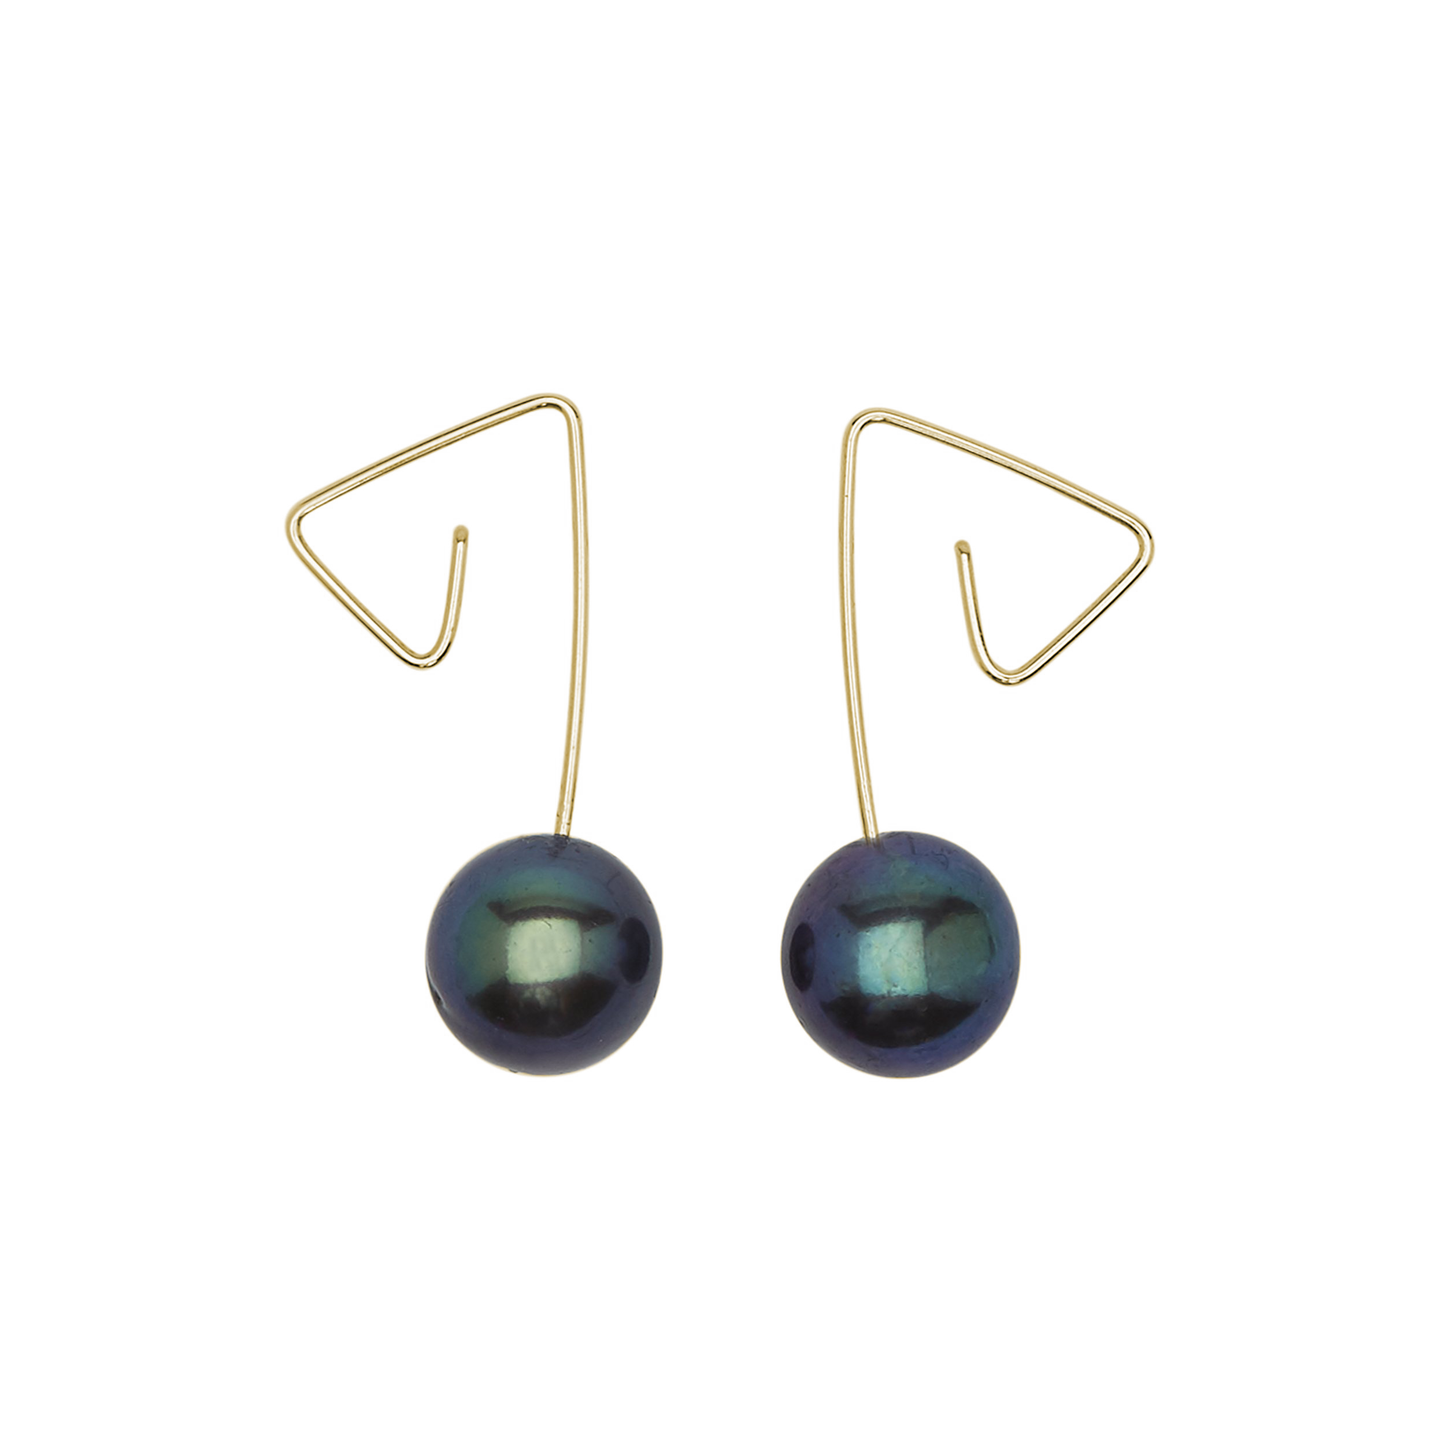 Short Drop Earrings with Round Fresh Water Pearl (5/6mm)